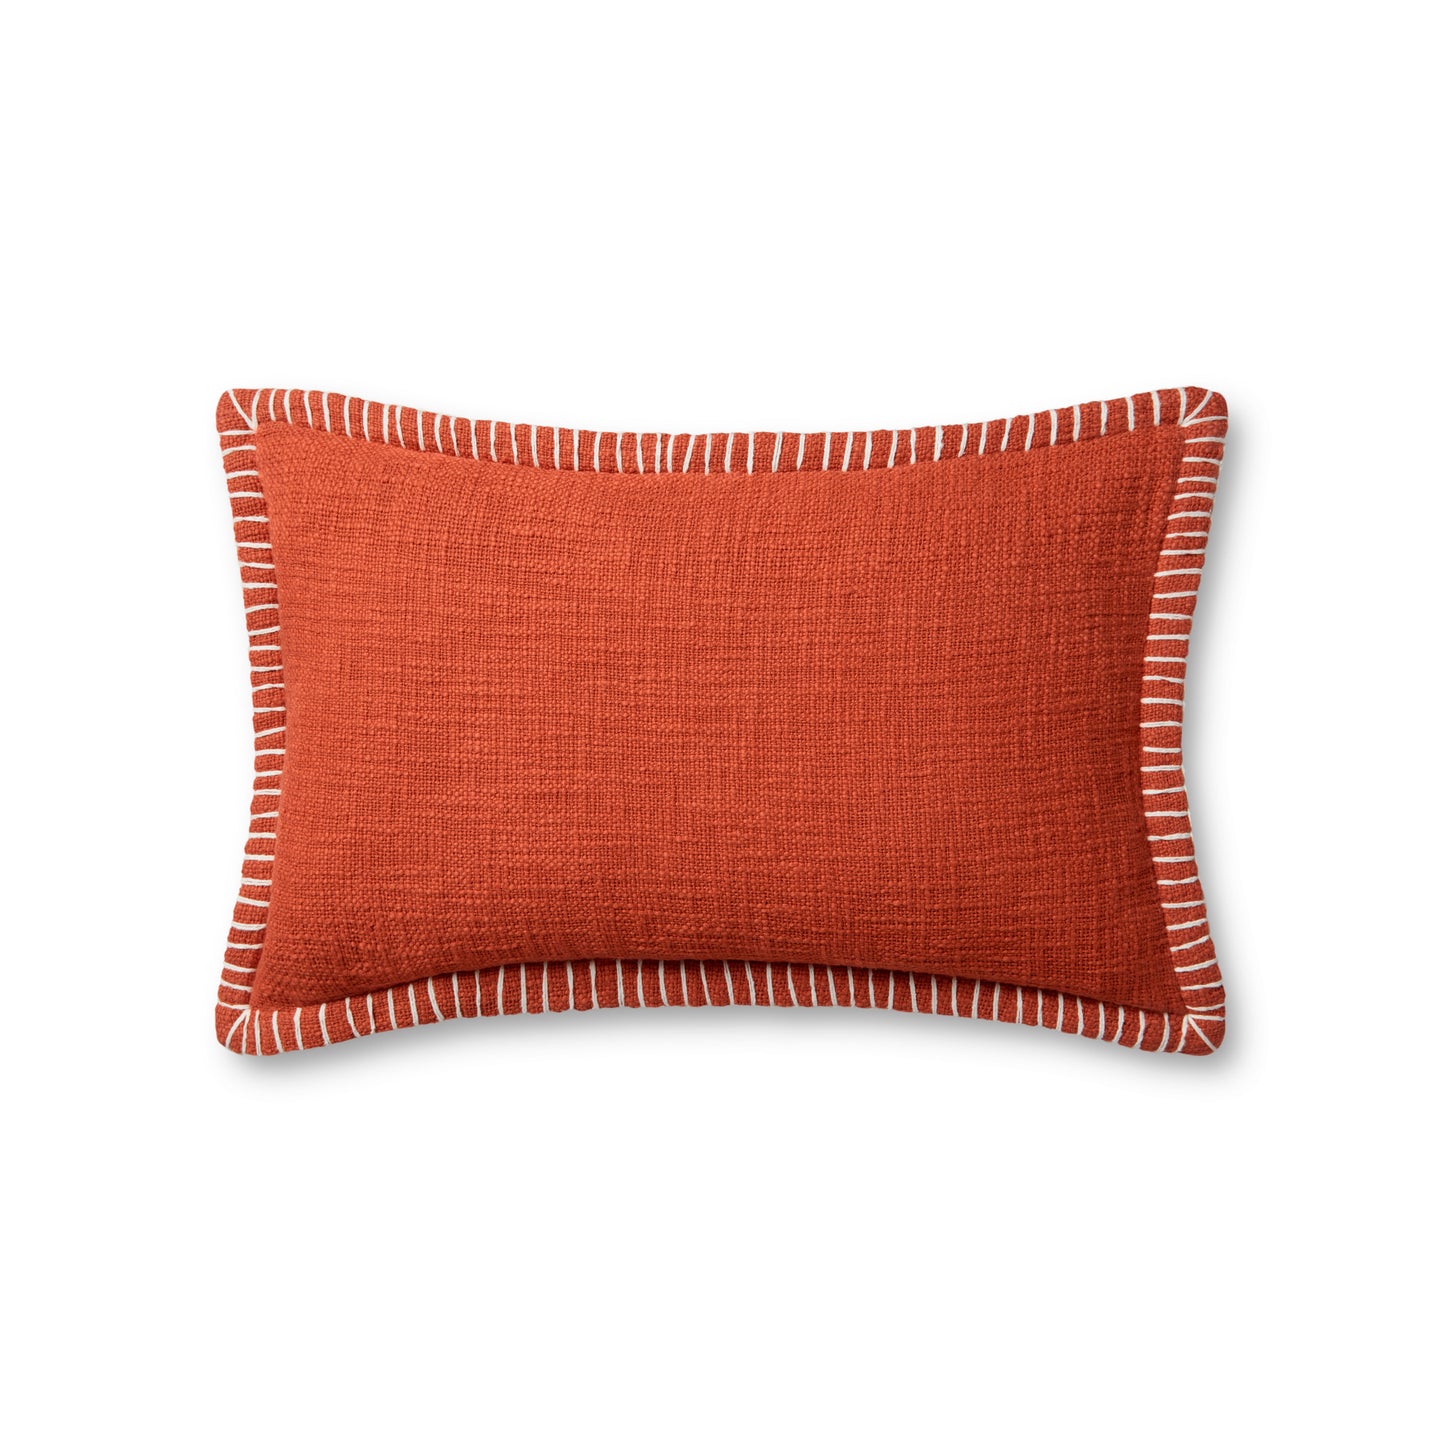 Photo of a pillow;  PLL0109 Orange 13'' x 21'' Cover w/Poly Pillow